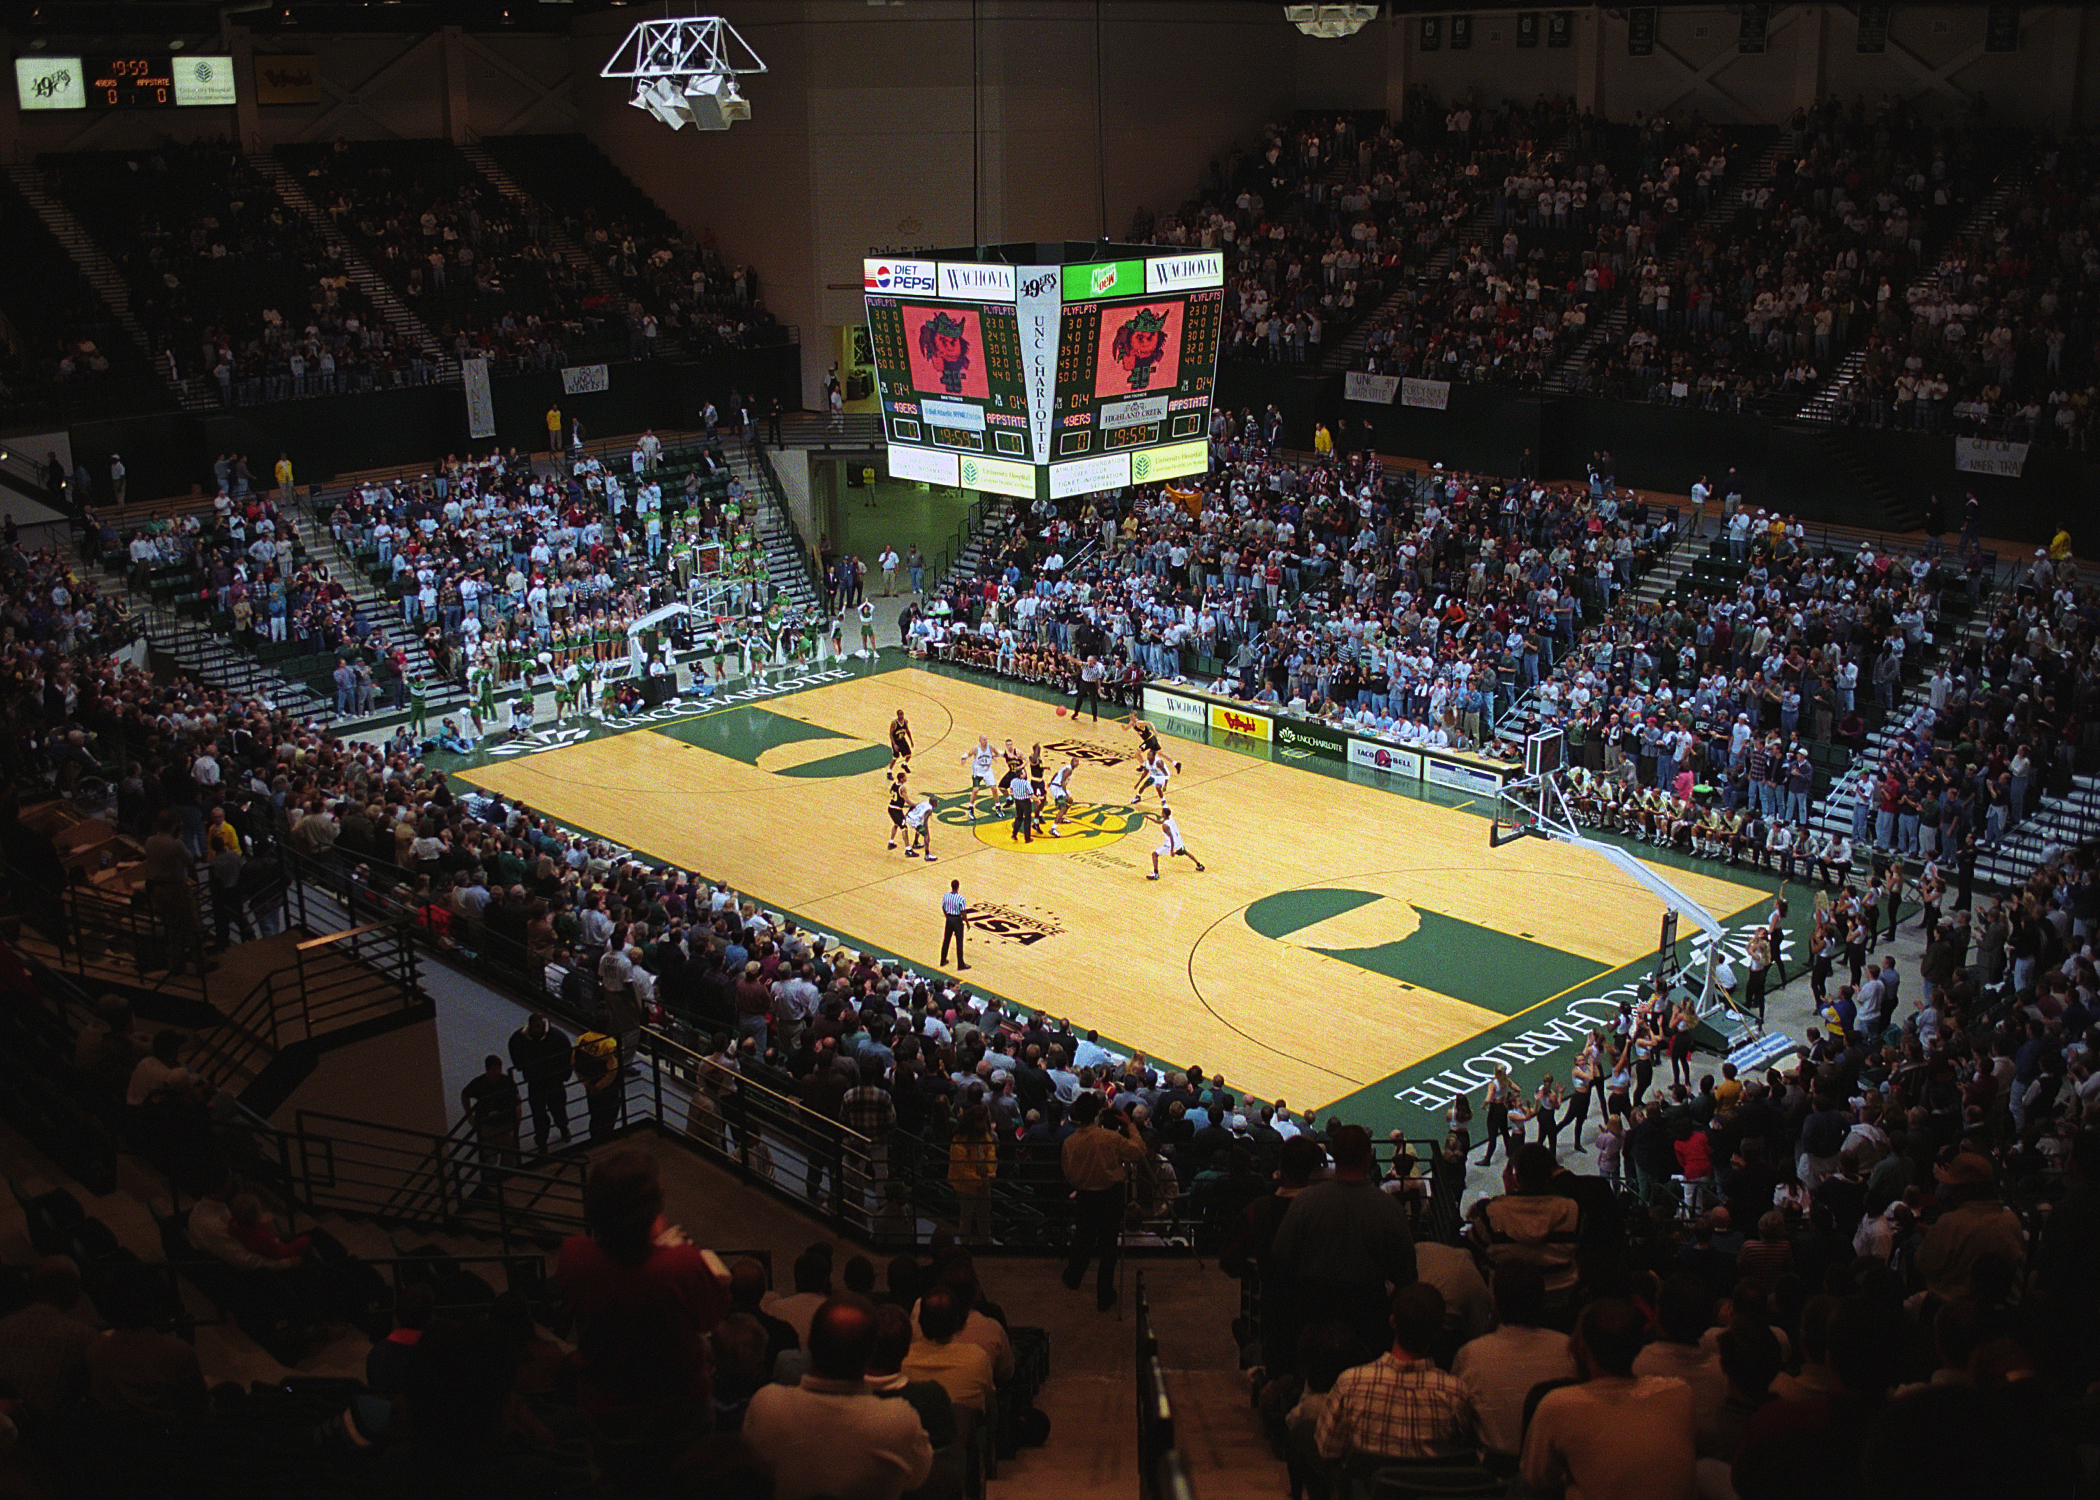 Basketball game being played at the Halton Arena on it's opening on December 2, 1996